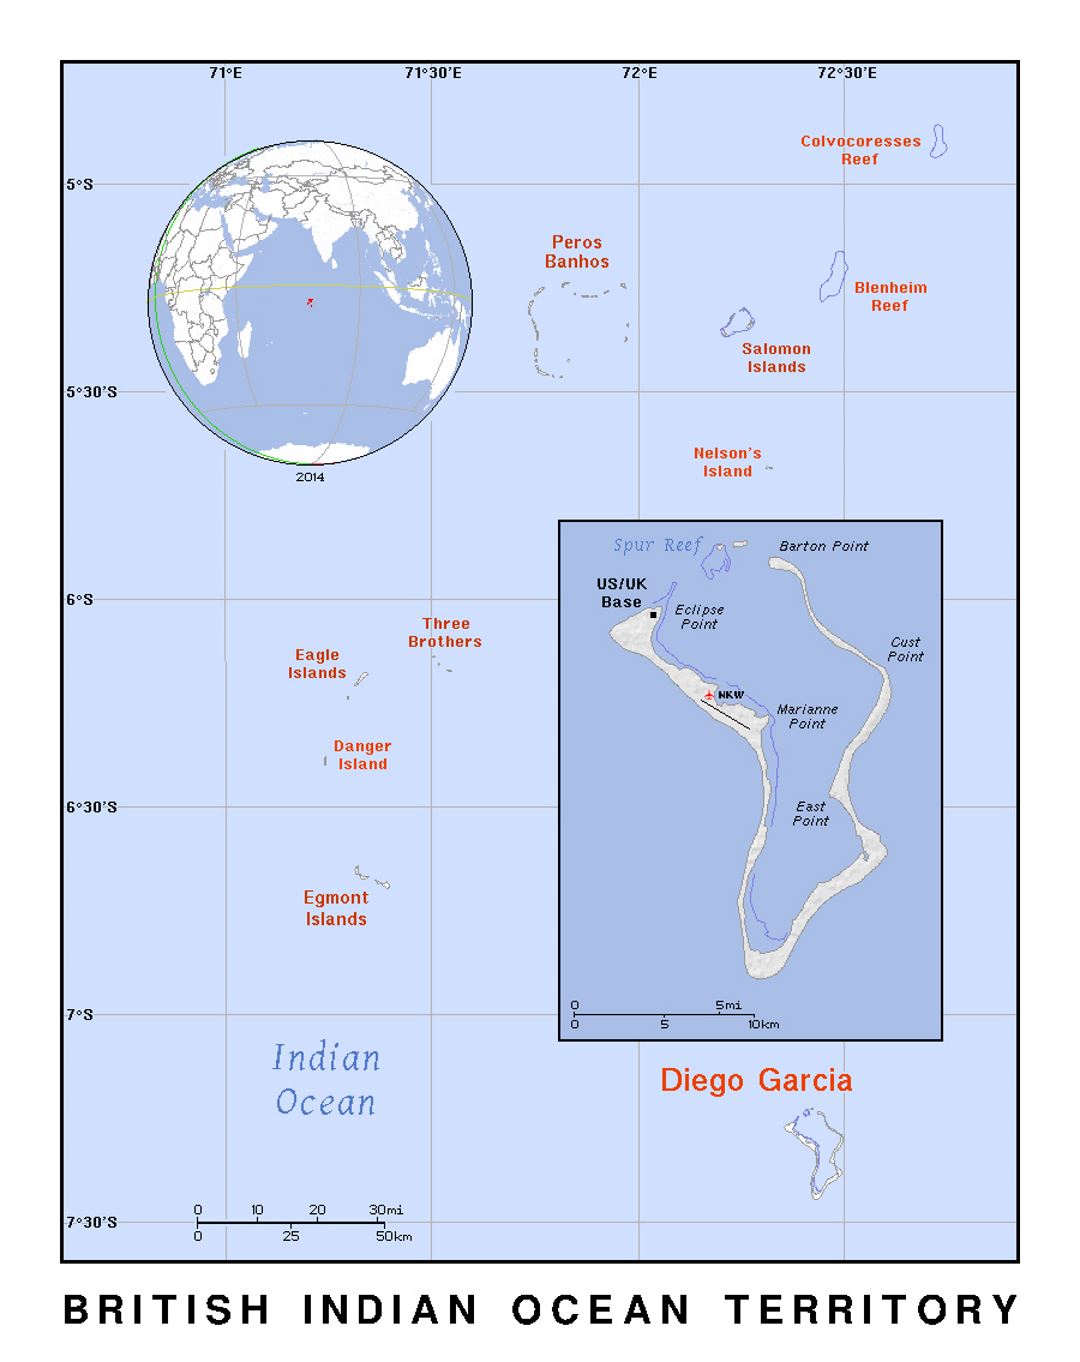 UK maritime claims about defining the outer limits of a zone adjacent to the territorial sea of the British Indian Ocean Territory, known as the Environment (Protection and Preservation) Zone